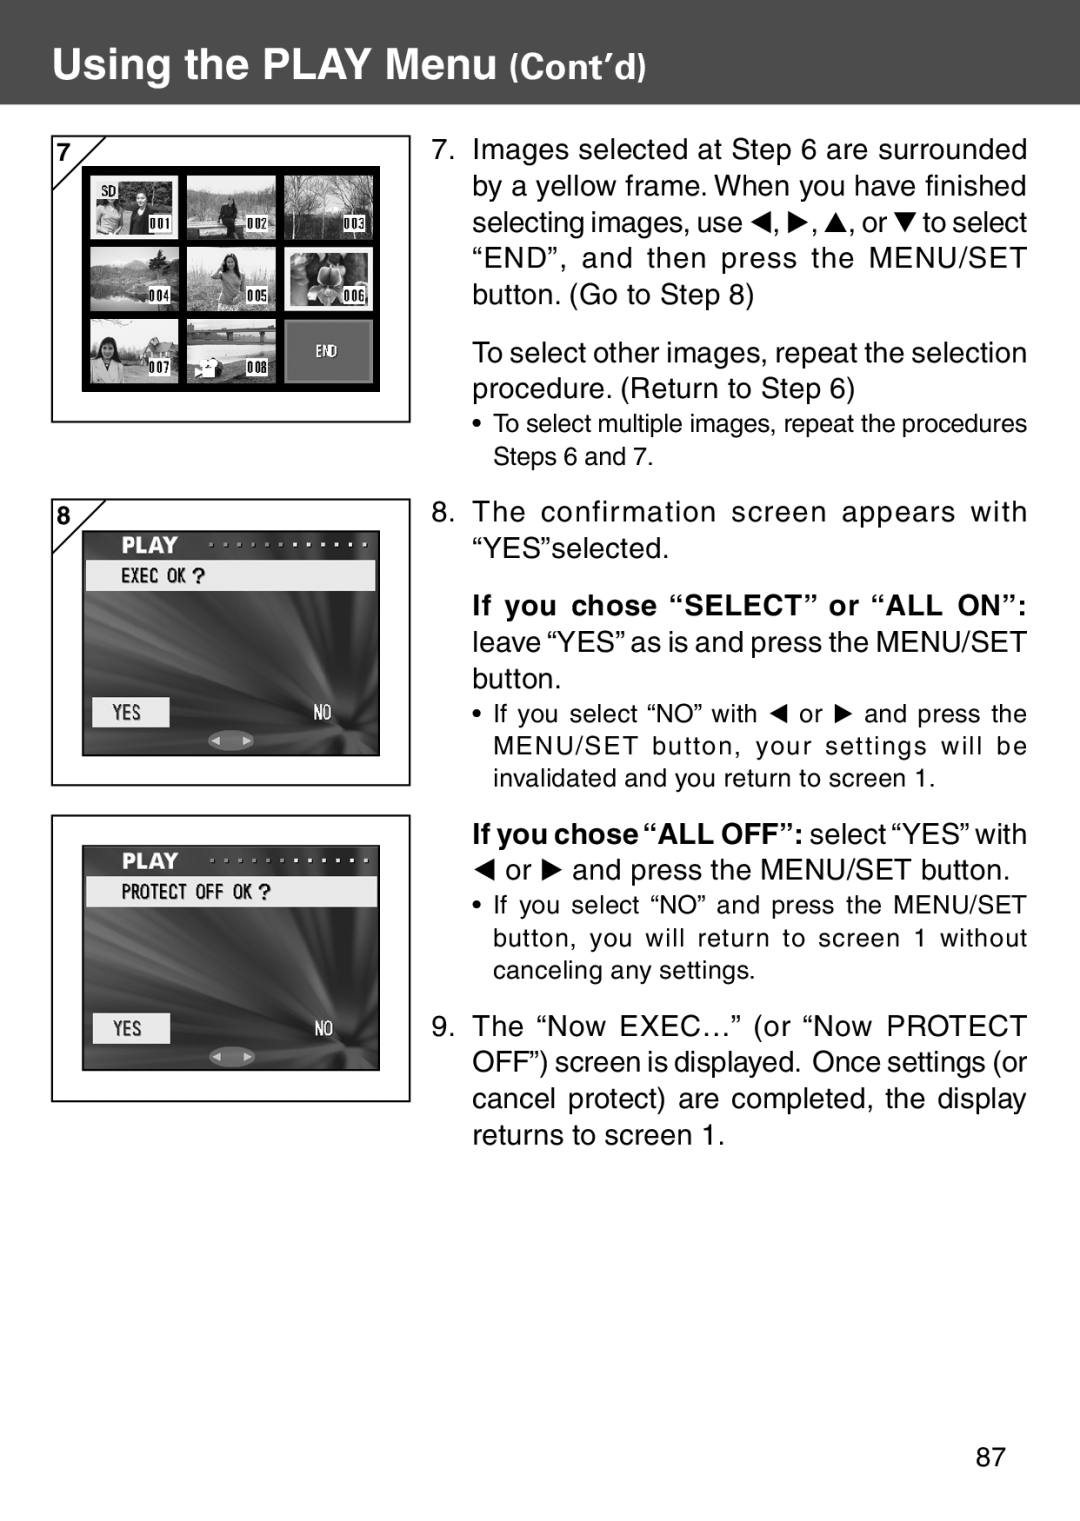 Konica Minolta KD-500Z user manual If you chose “ALL OFF” select “YES” with, Using the PLAY Menu Cont’d 